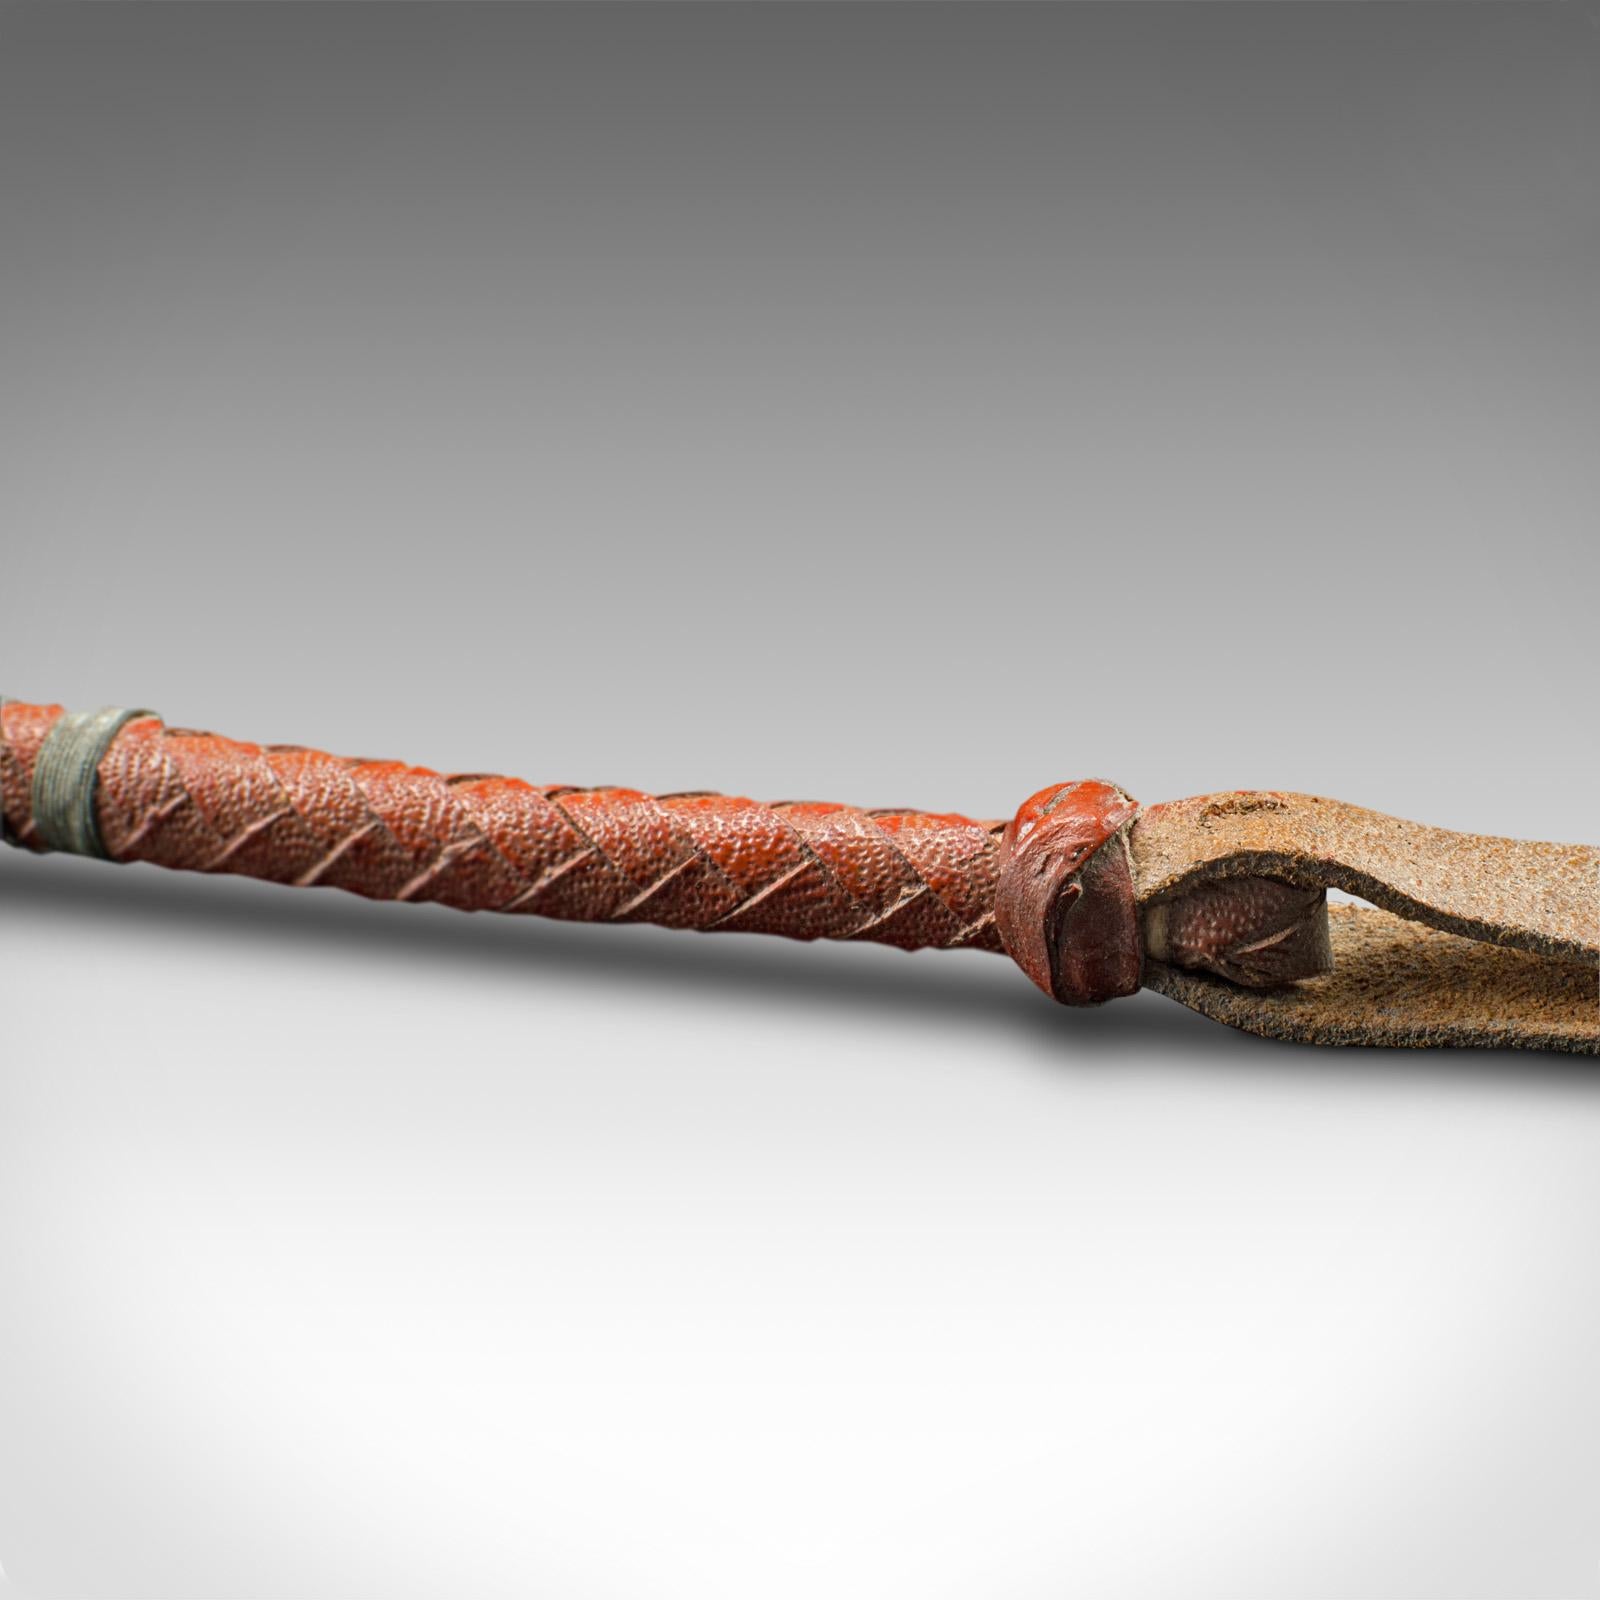 Antique Camel Whip, Arabic, Leather Rider's Crop, Decorative, Victorian, C.1900 For Sale 1